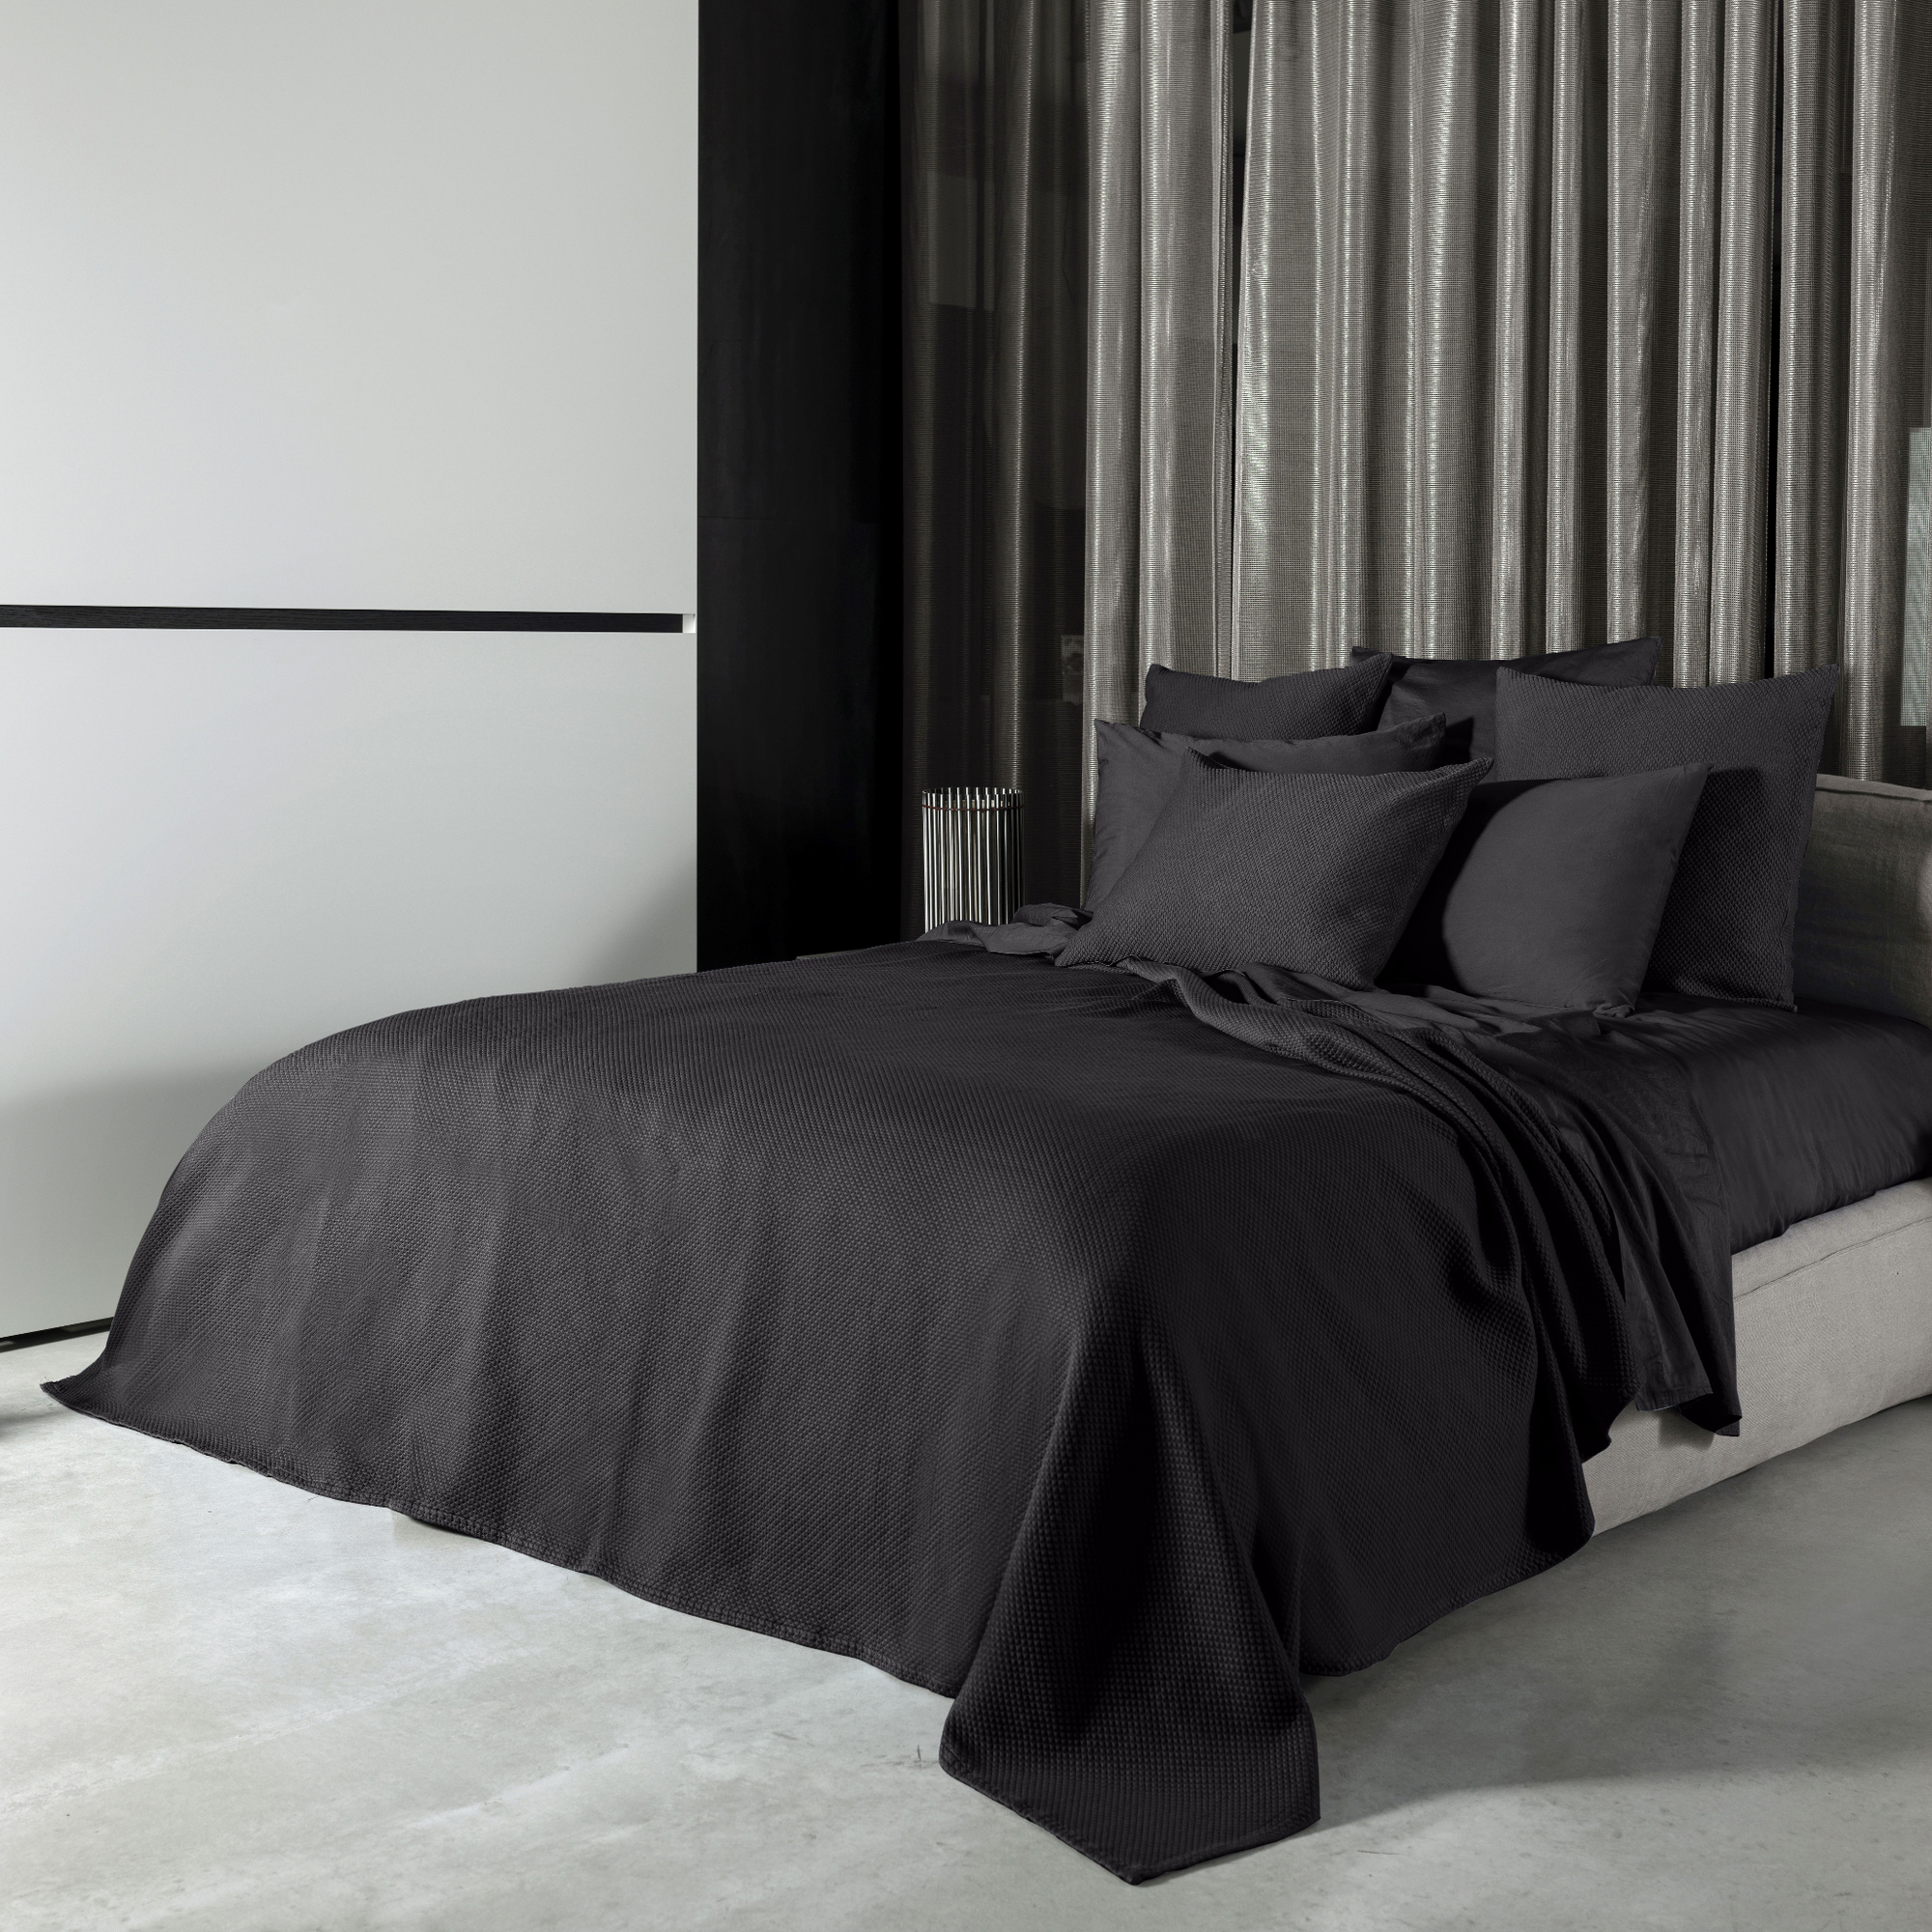 Charcoal Signoria Olivia Coverlet and Shams on a Bed in a Room